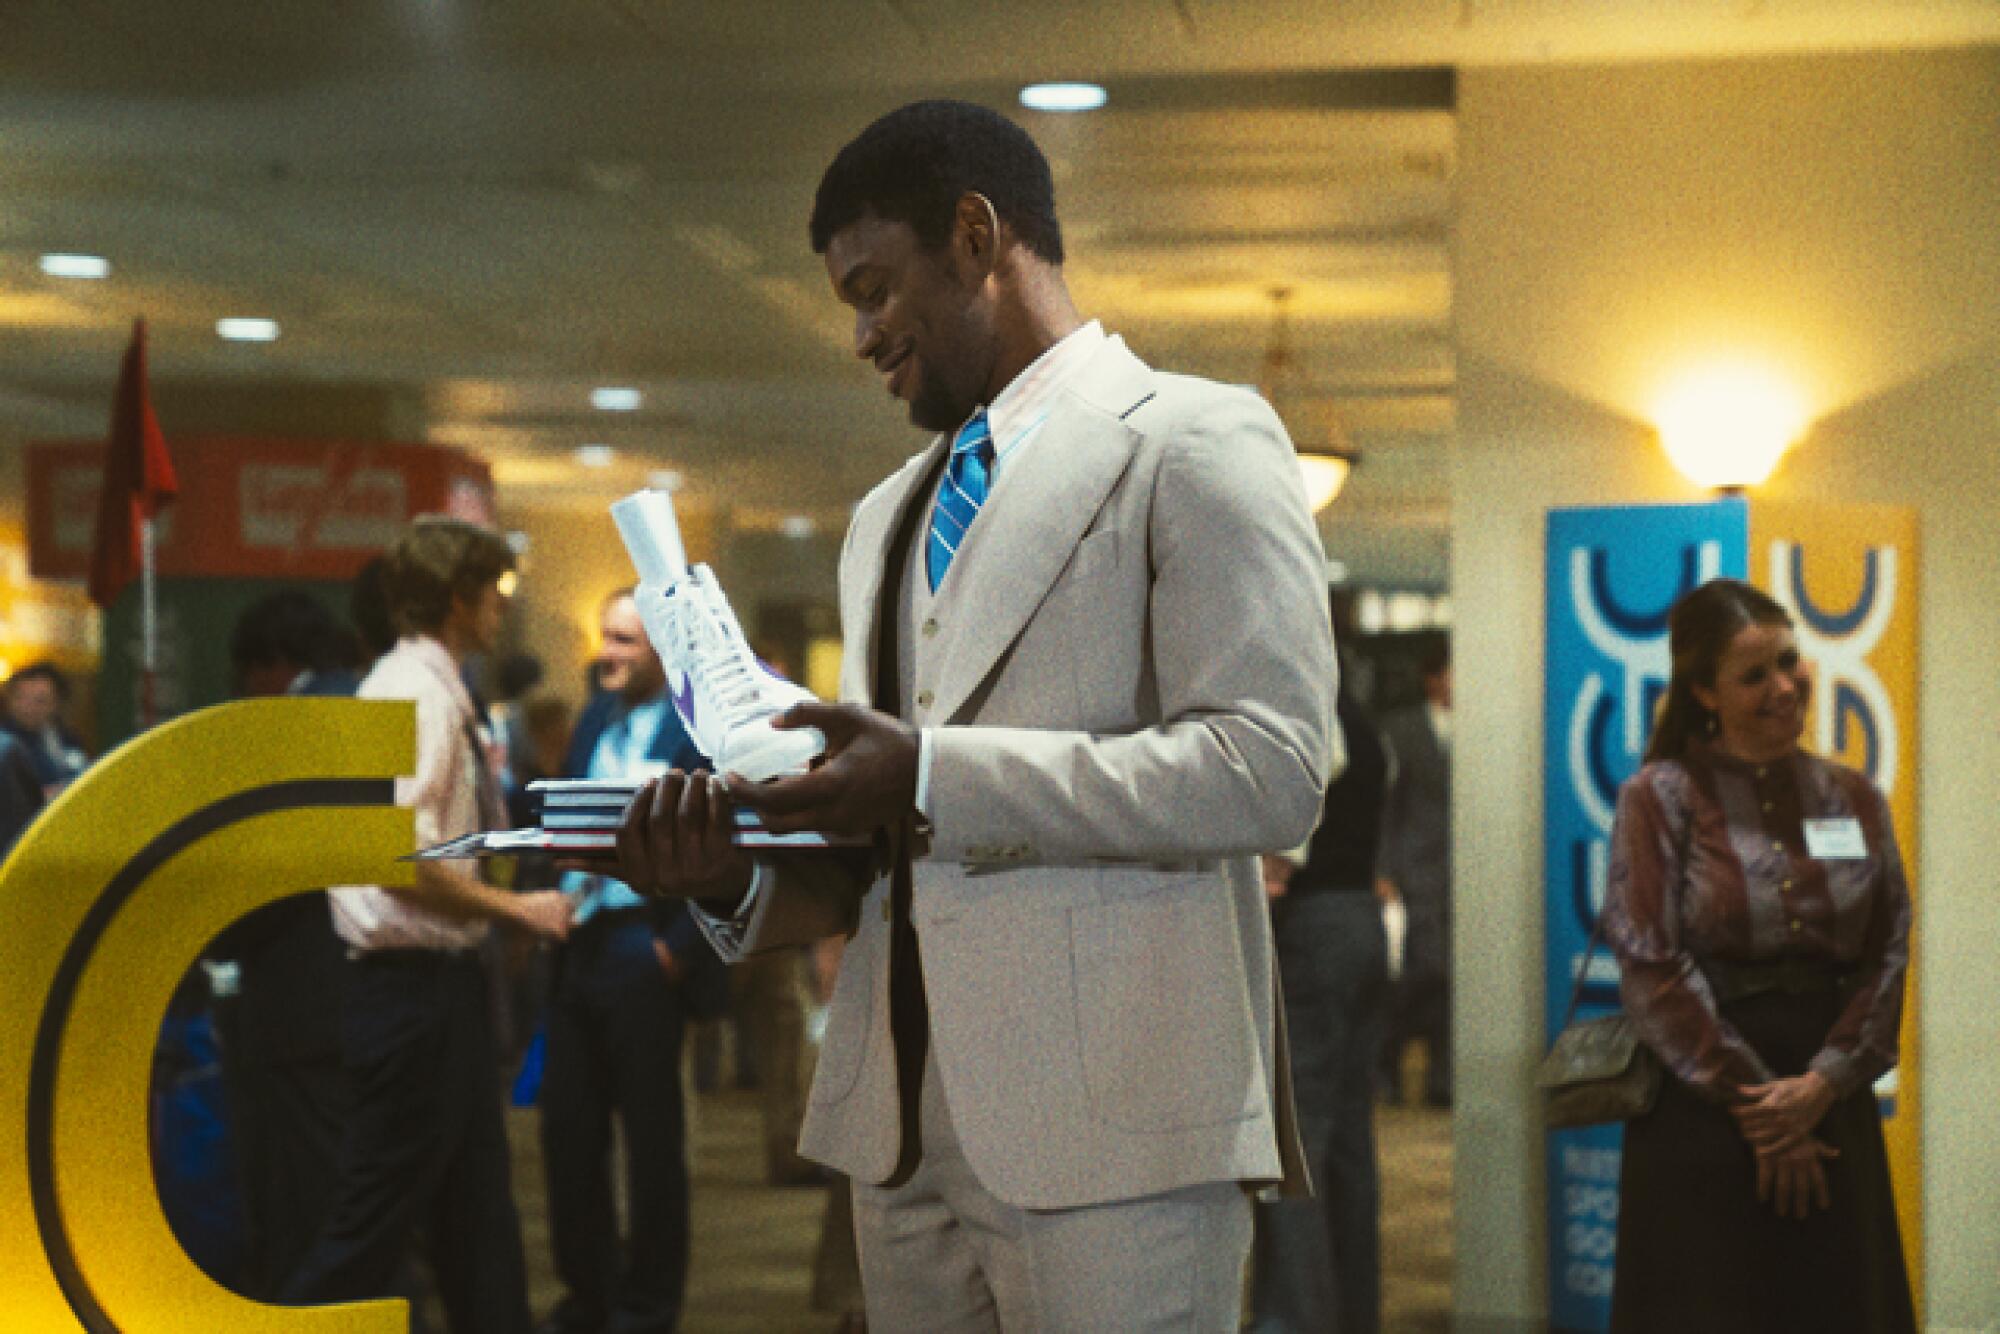 A man in a white suit examines a Nike high-top shoe.